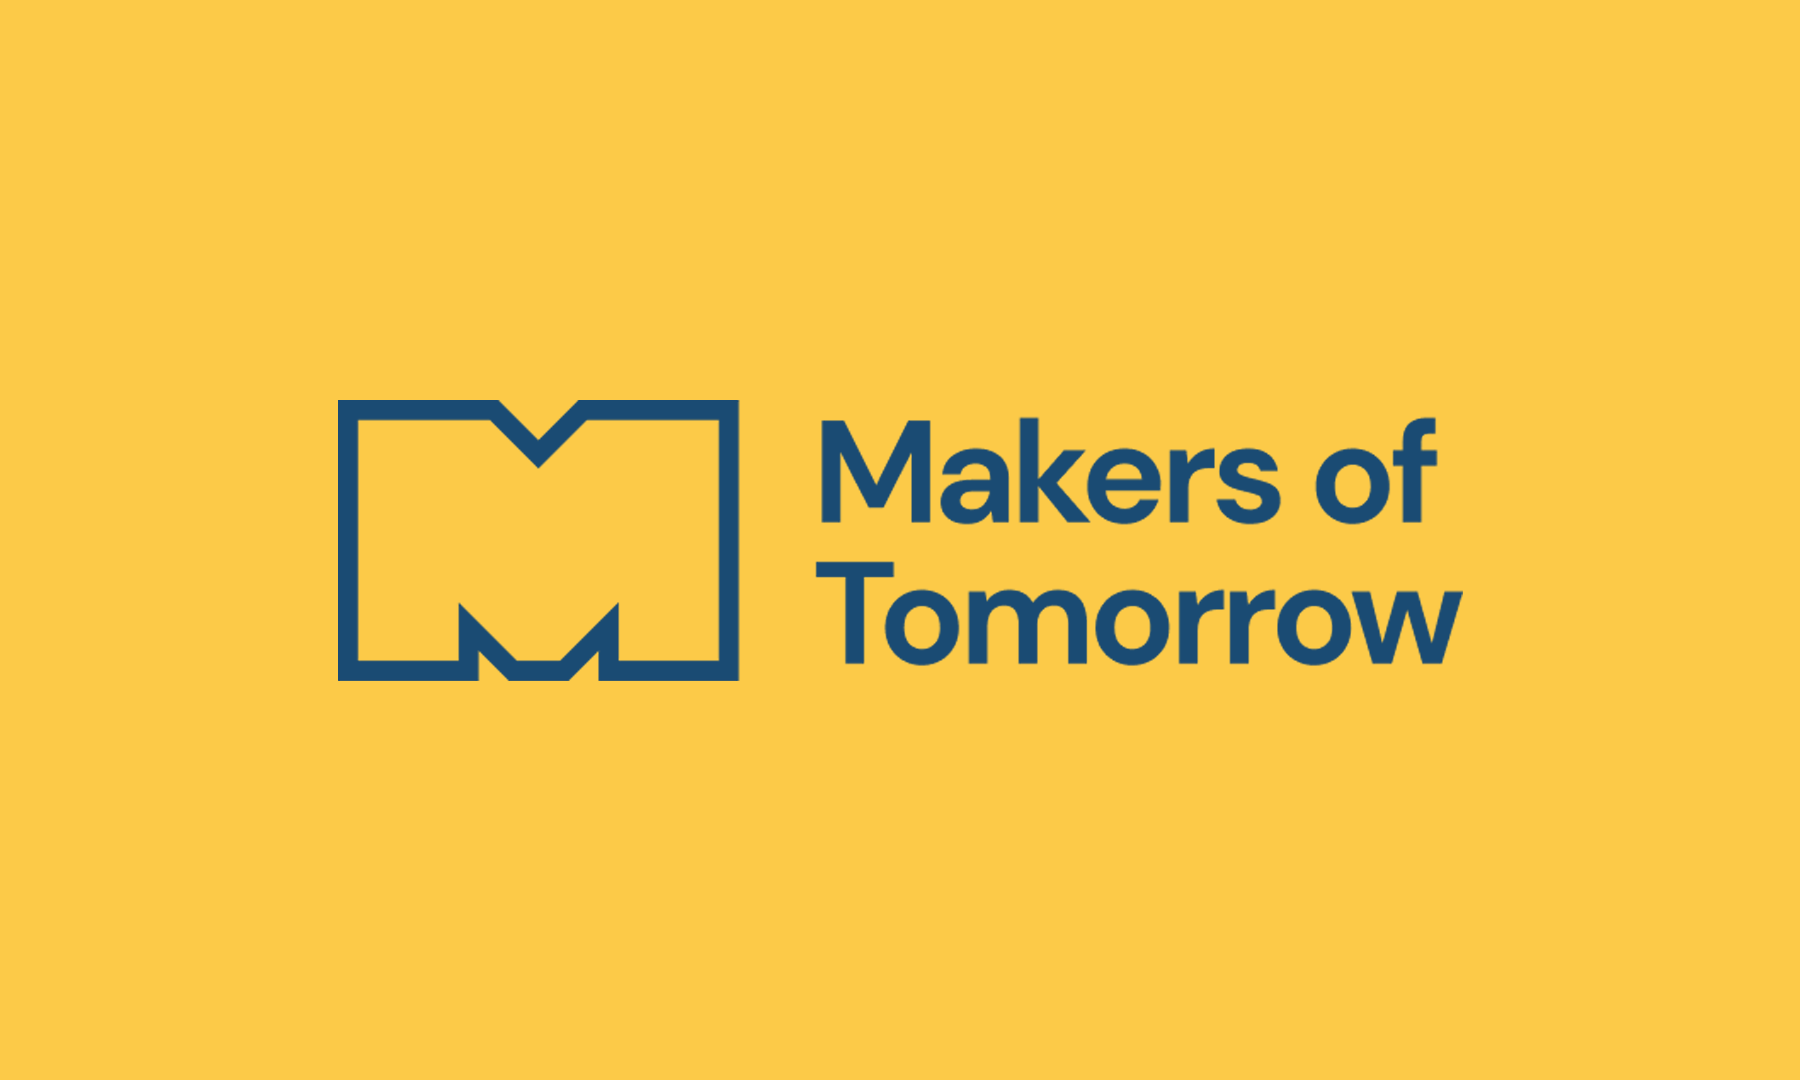 Makers of tomorrow